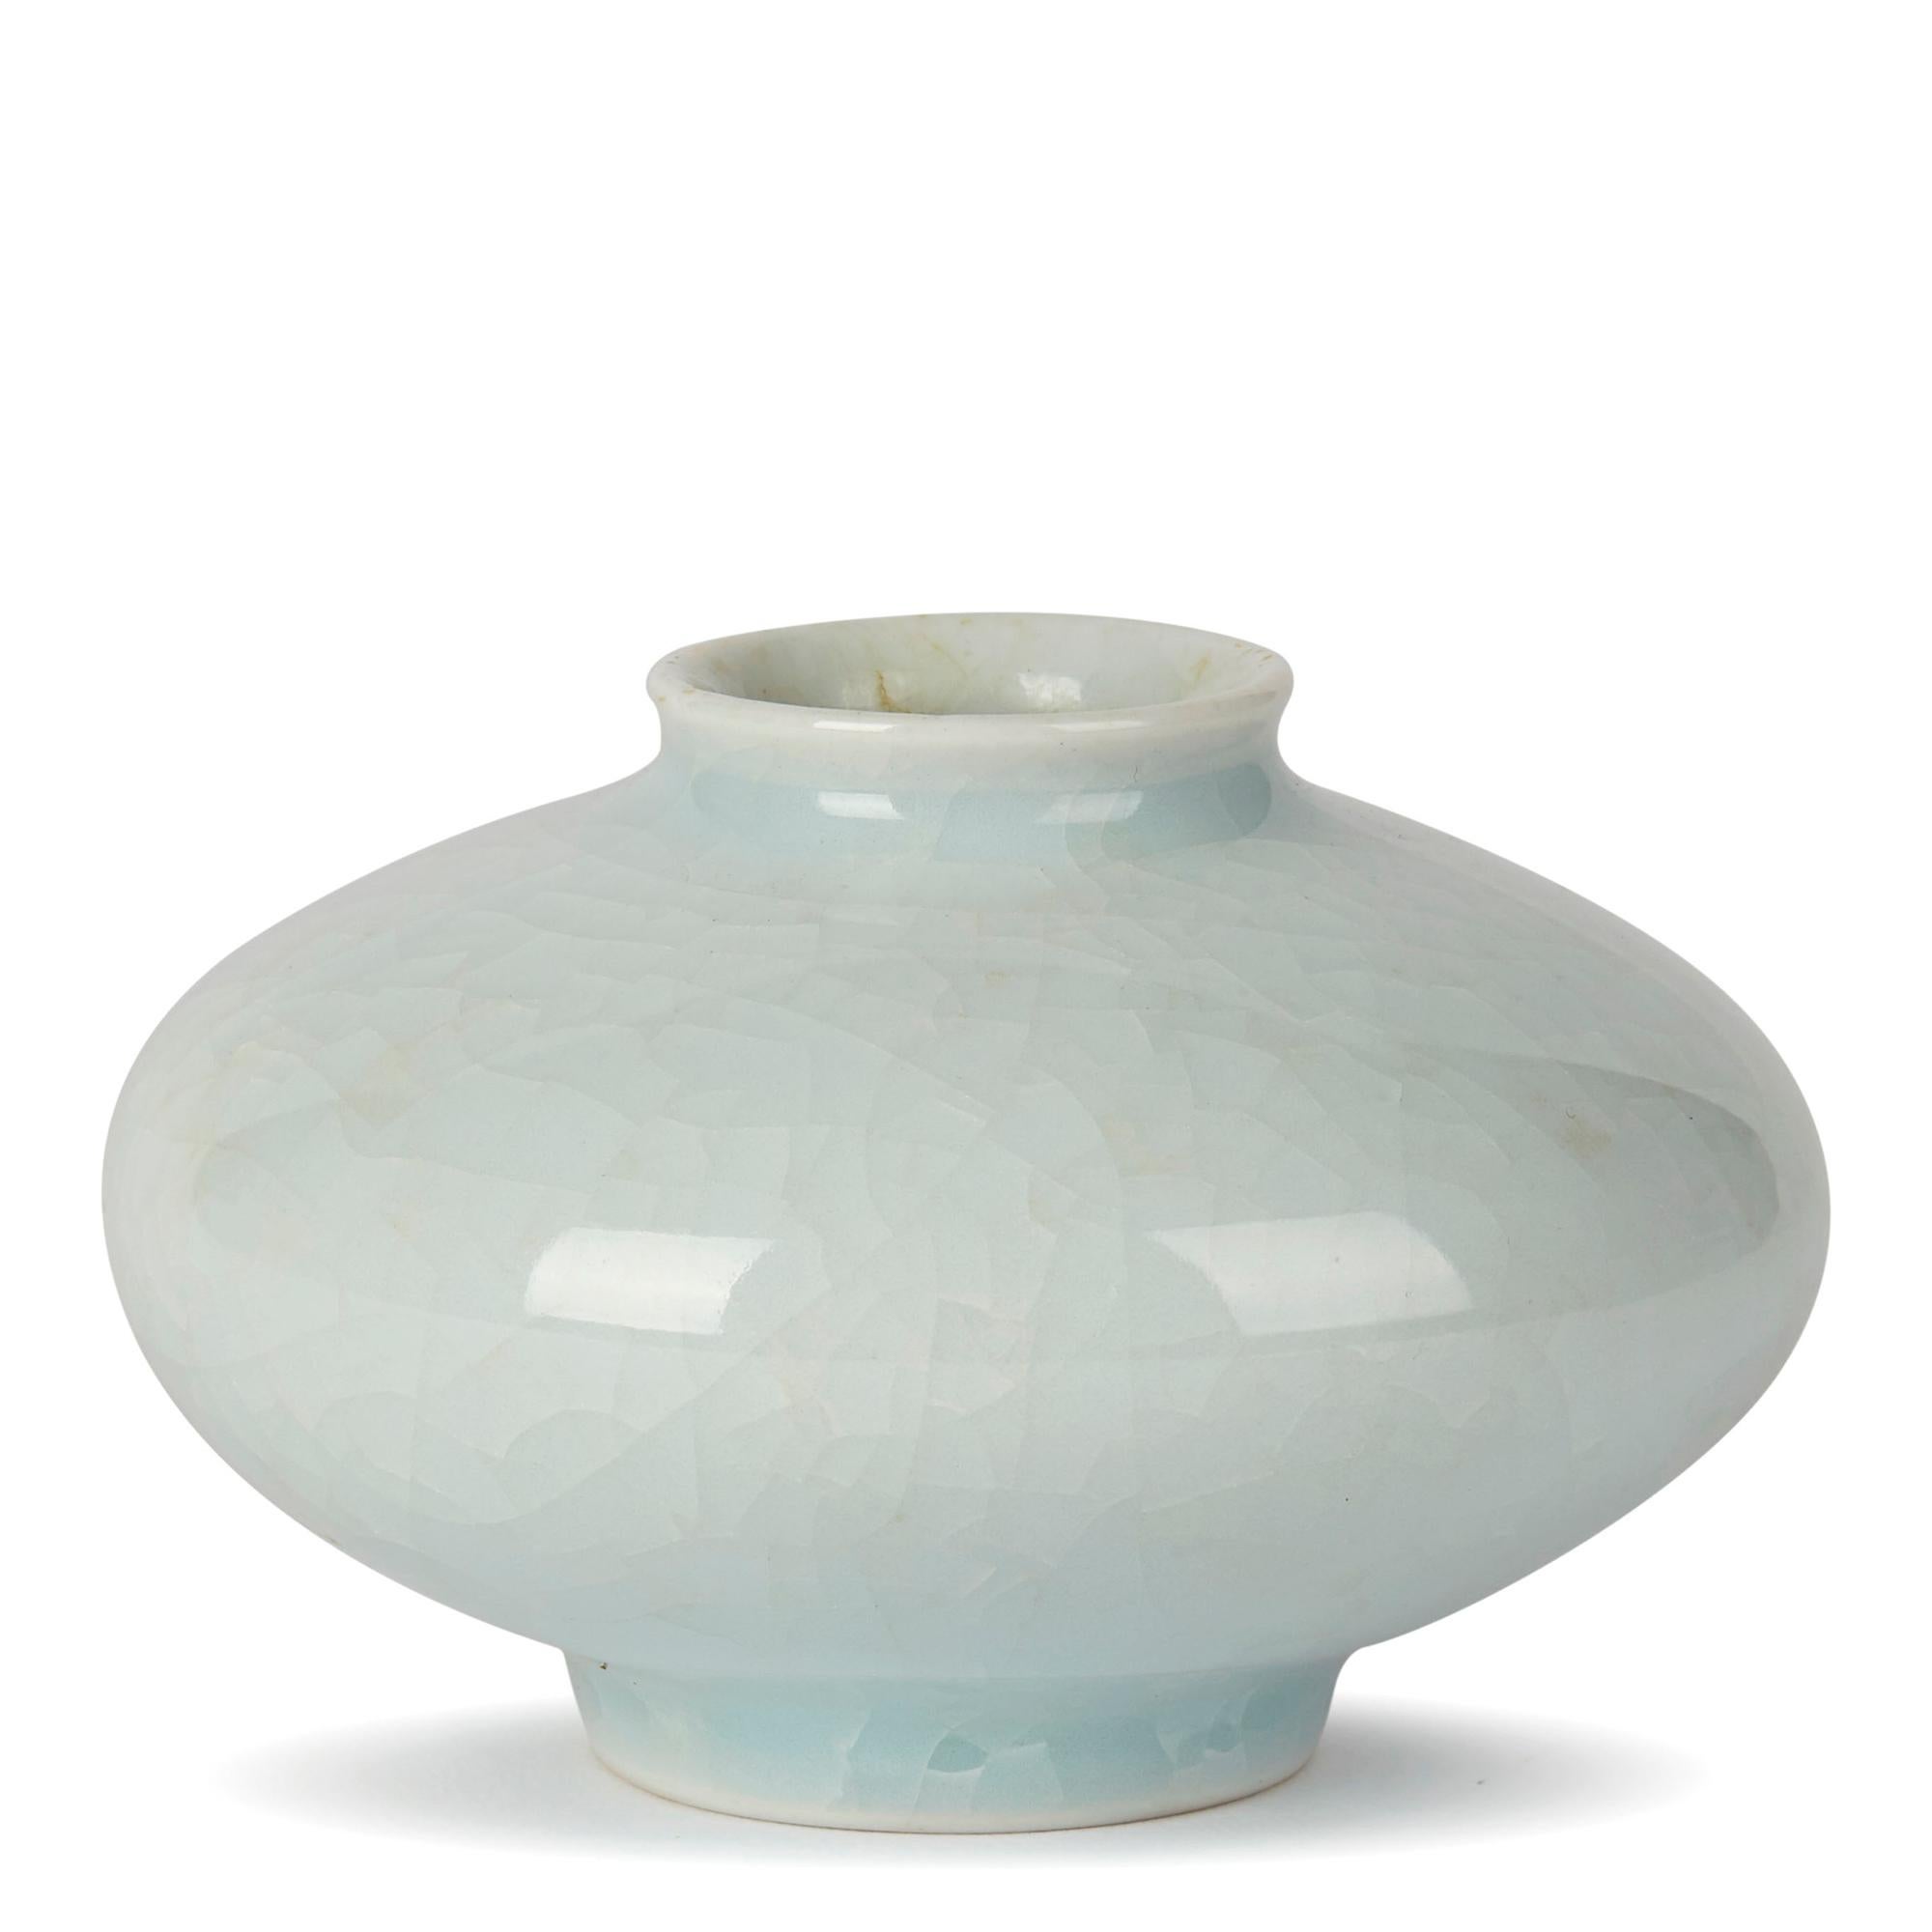 We have recently been extremely privileged to meet acclaimed American born studio potter and artist William Mehornay. We are also greatly honored for him to have entrusted to us pieces made by him in the period 1974-85, which in his opinion are